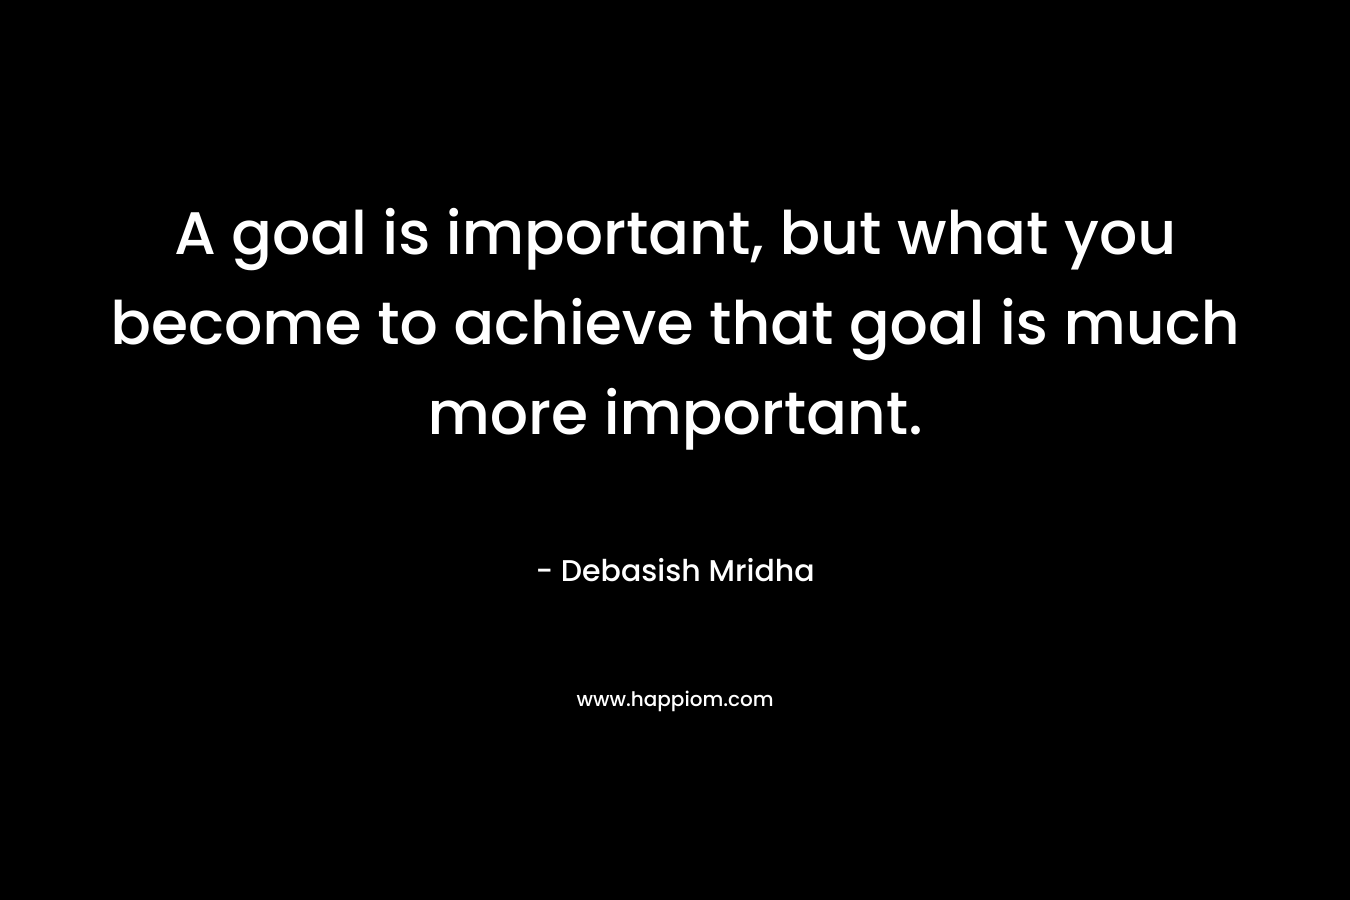 A goal is important, but what you become to achieve that goal is much more important.